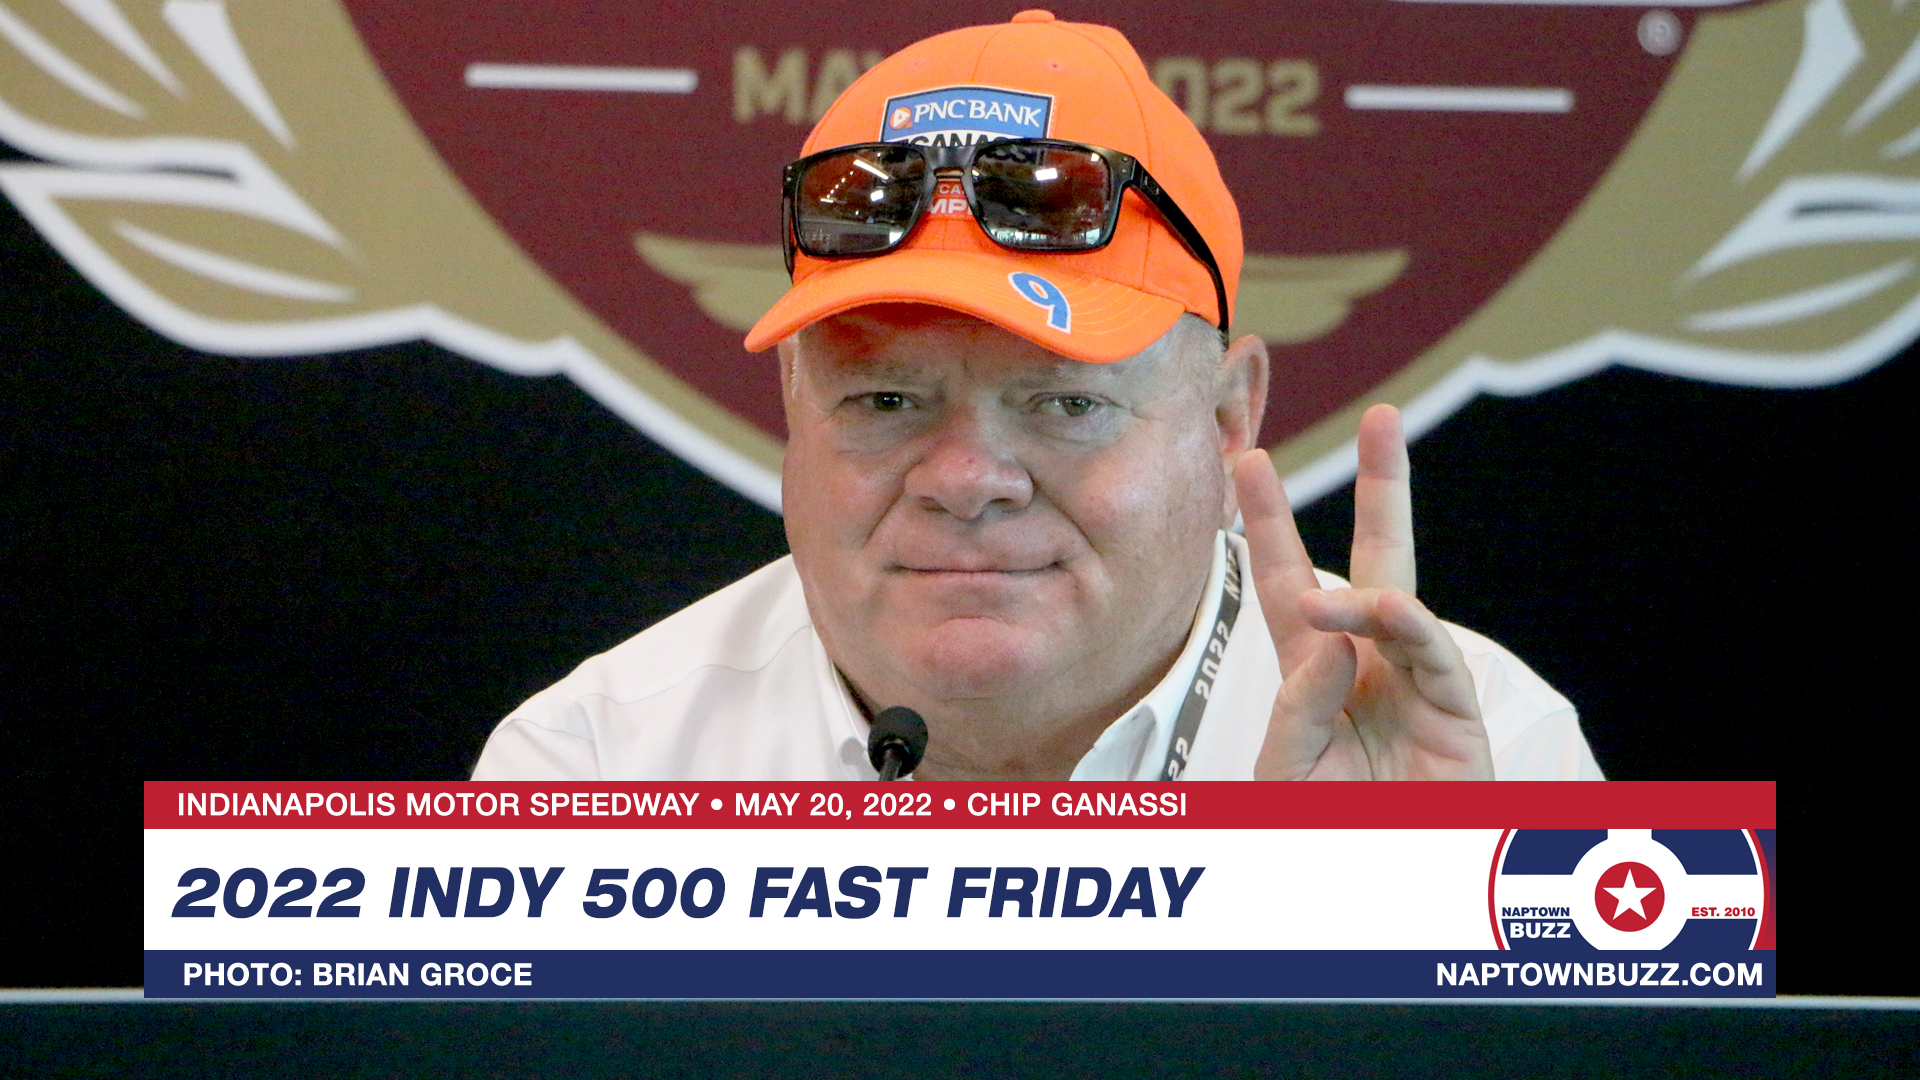 Chip Ganassi on Indy 500 Fast Friday Practice at Indianapolis Motor Speedway on May 20, 2022